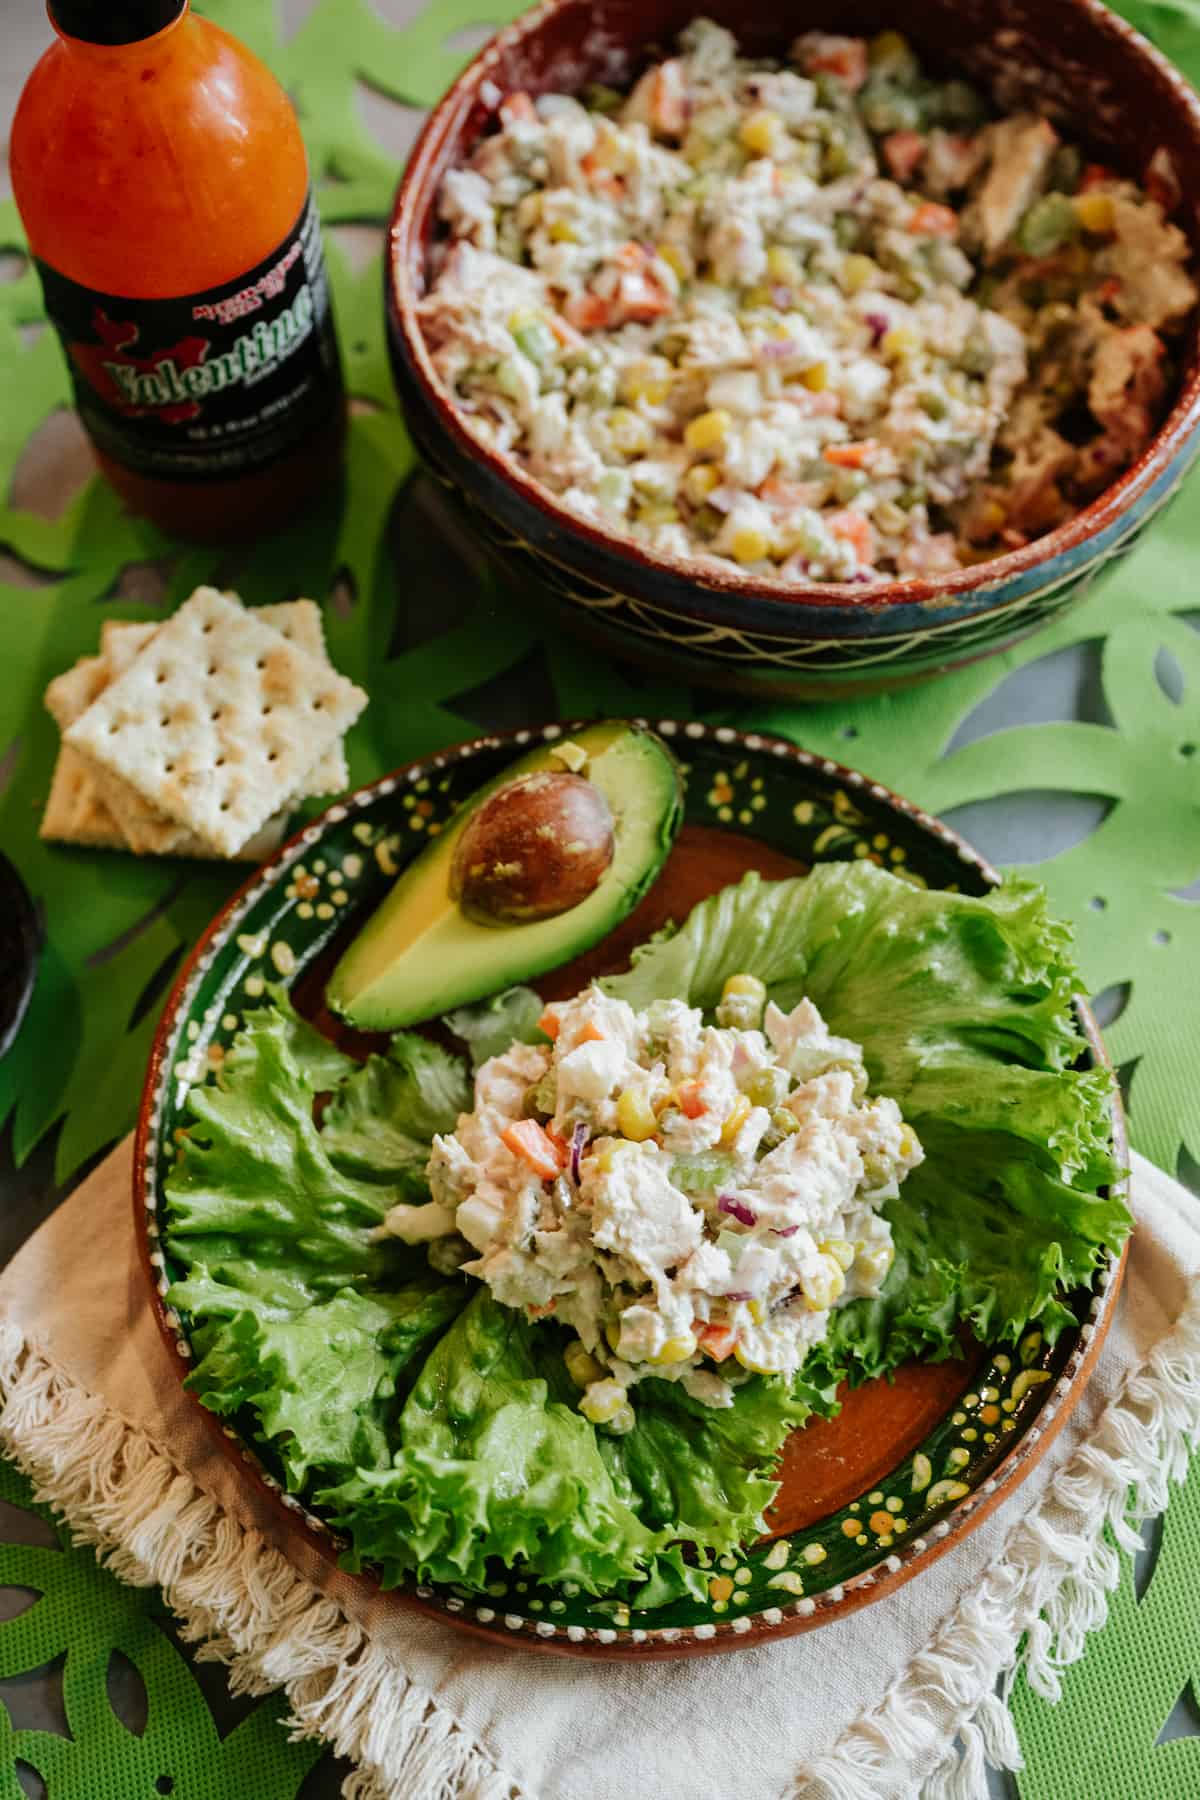 table set with a bowl of ensalada de atun, a bottle of valentina hot sauce, and a plate with a lettuce leaf filled with Mexican tuna salad, a quarter of an avocado on the side, and a handful of saltines. 